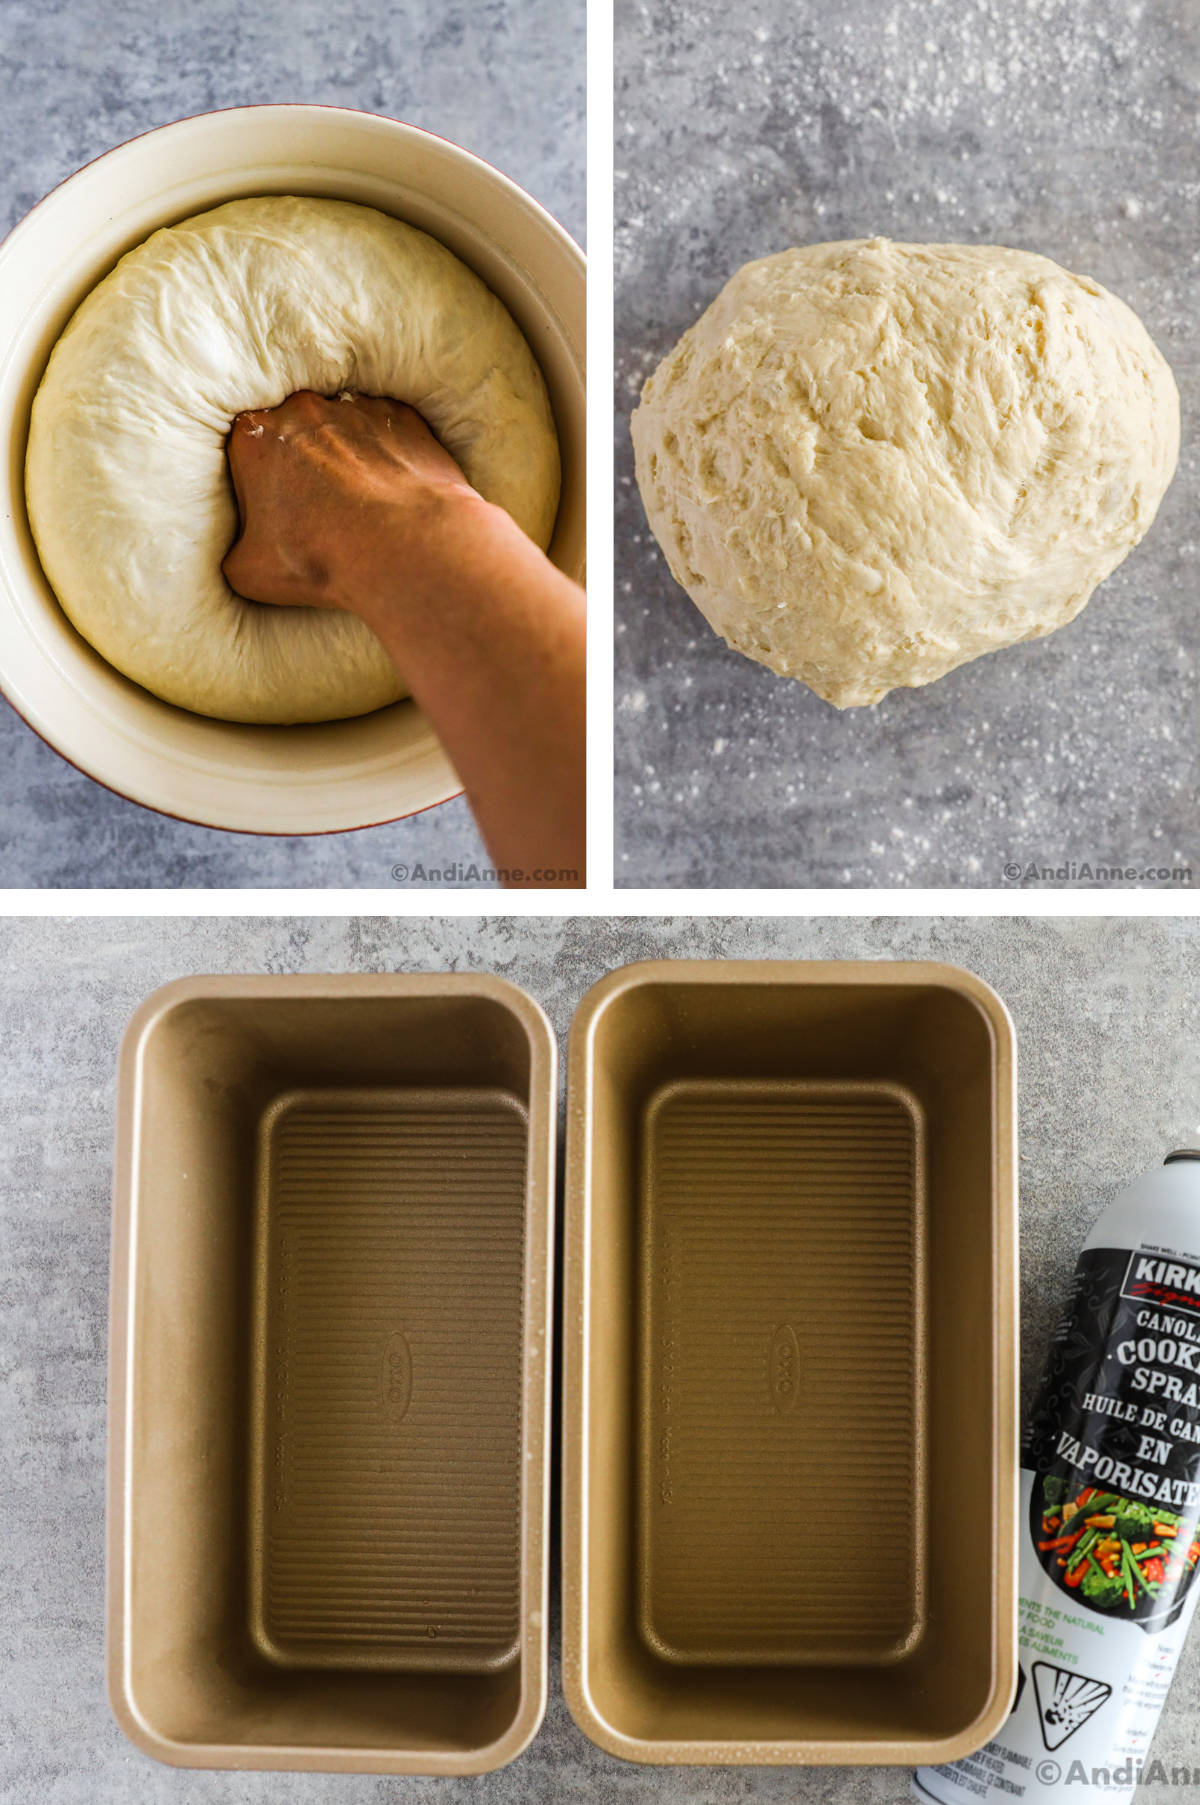 Three overhead images in one: 1. Dough being kneaded in a bowl. 2. Ball of dough on table top with flour sprinkled around it. 3. Two loaf pans with a can of Canola oil cooking spray beside them to the right. 